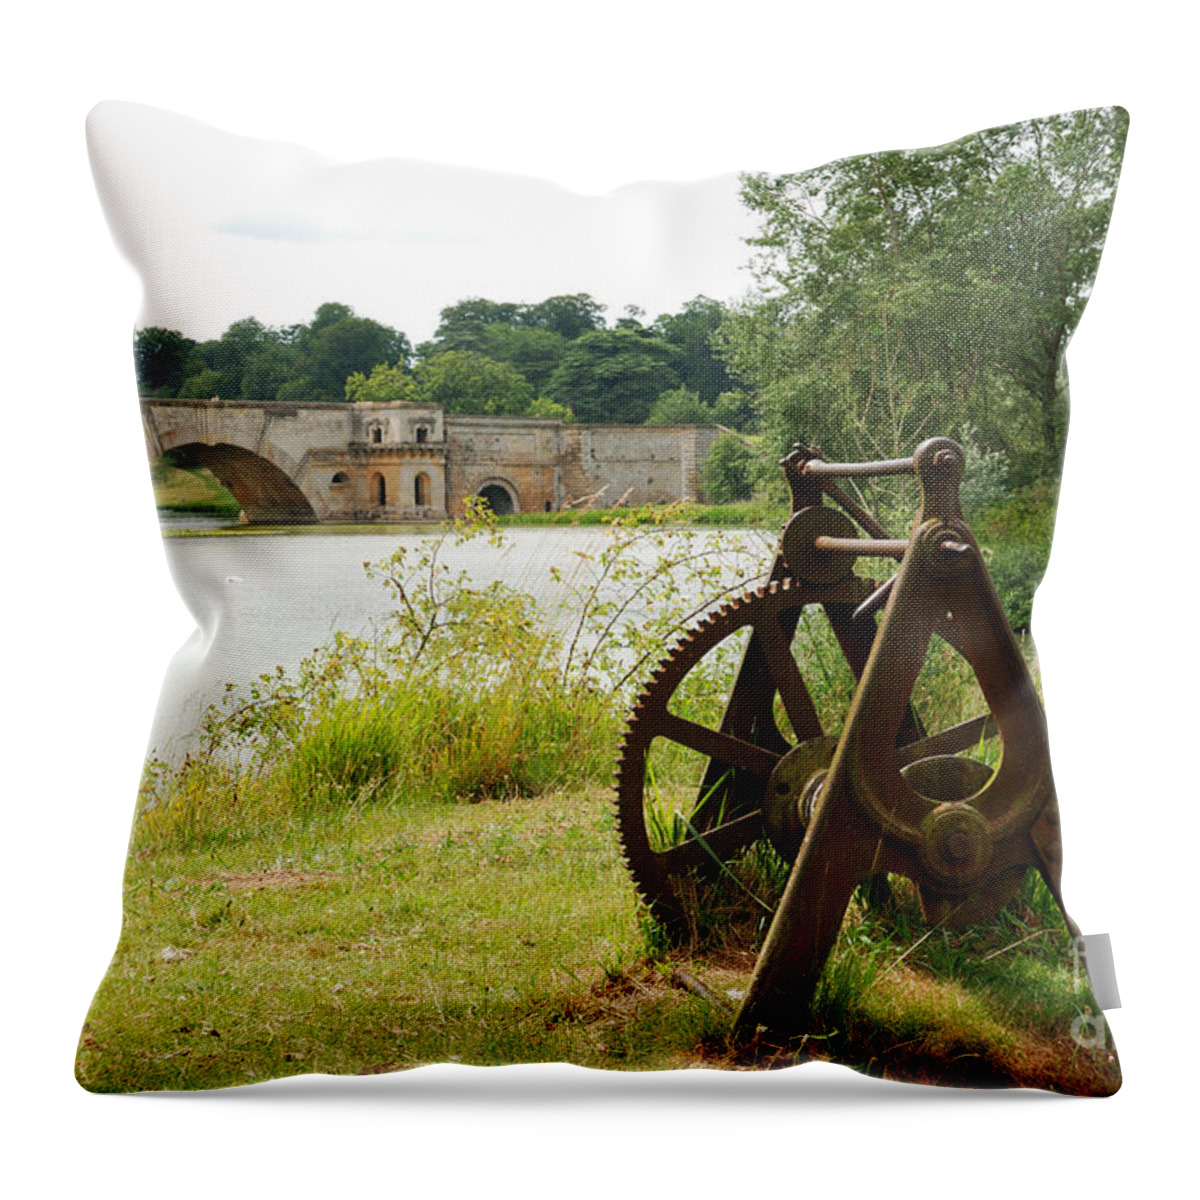 Cast Iron Mangle Blenheim Bridge Oxfordshire England Throw Pillow featuring the photograph Cast into the Future by Richard Gibb